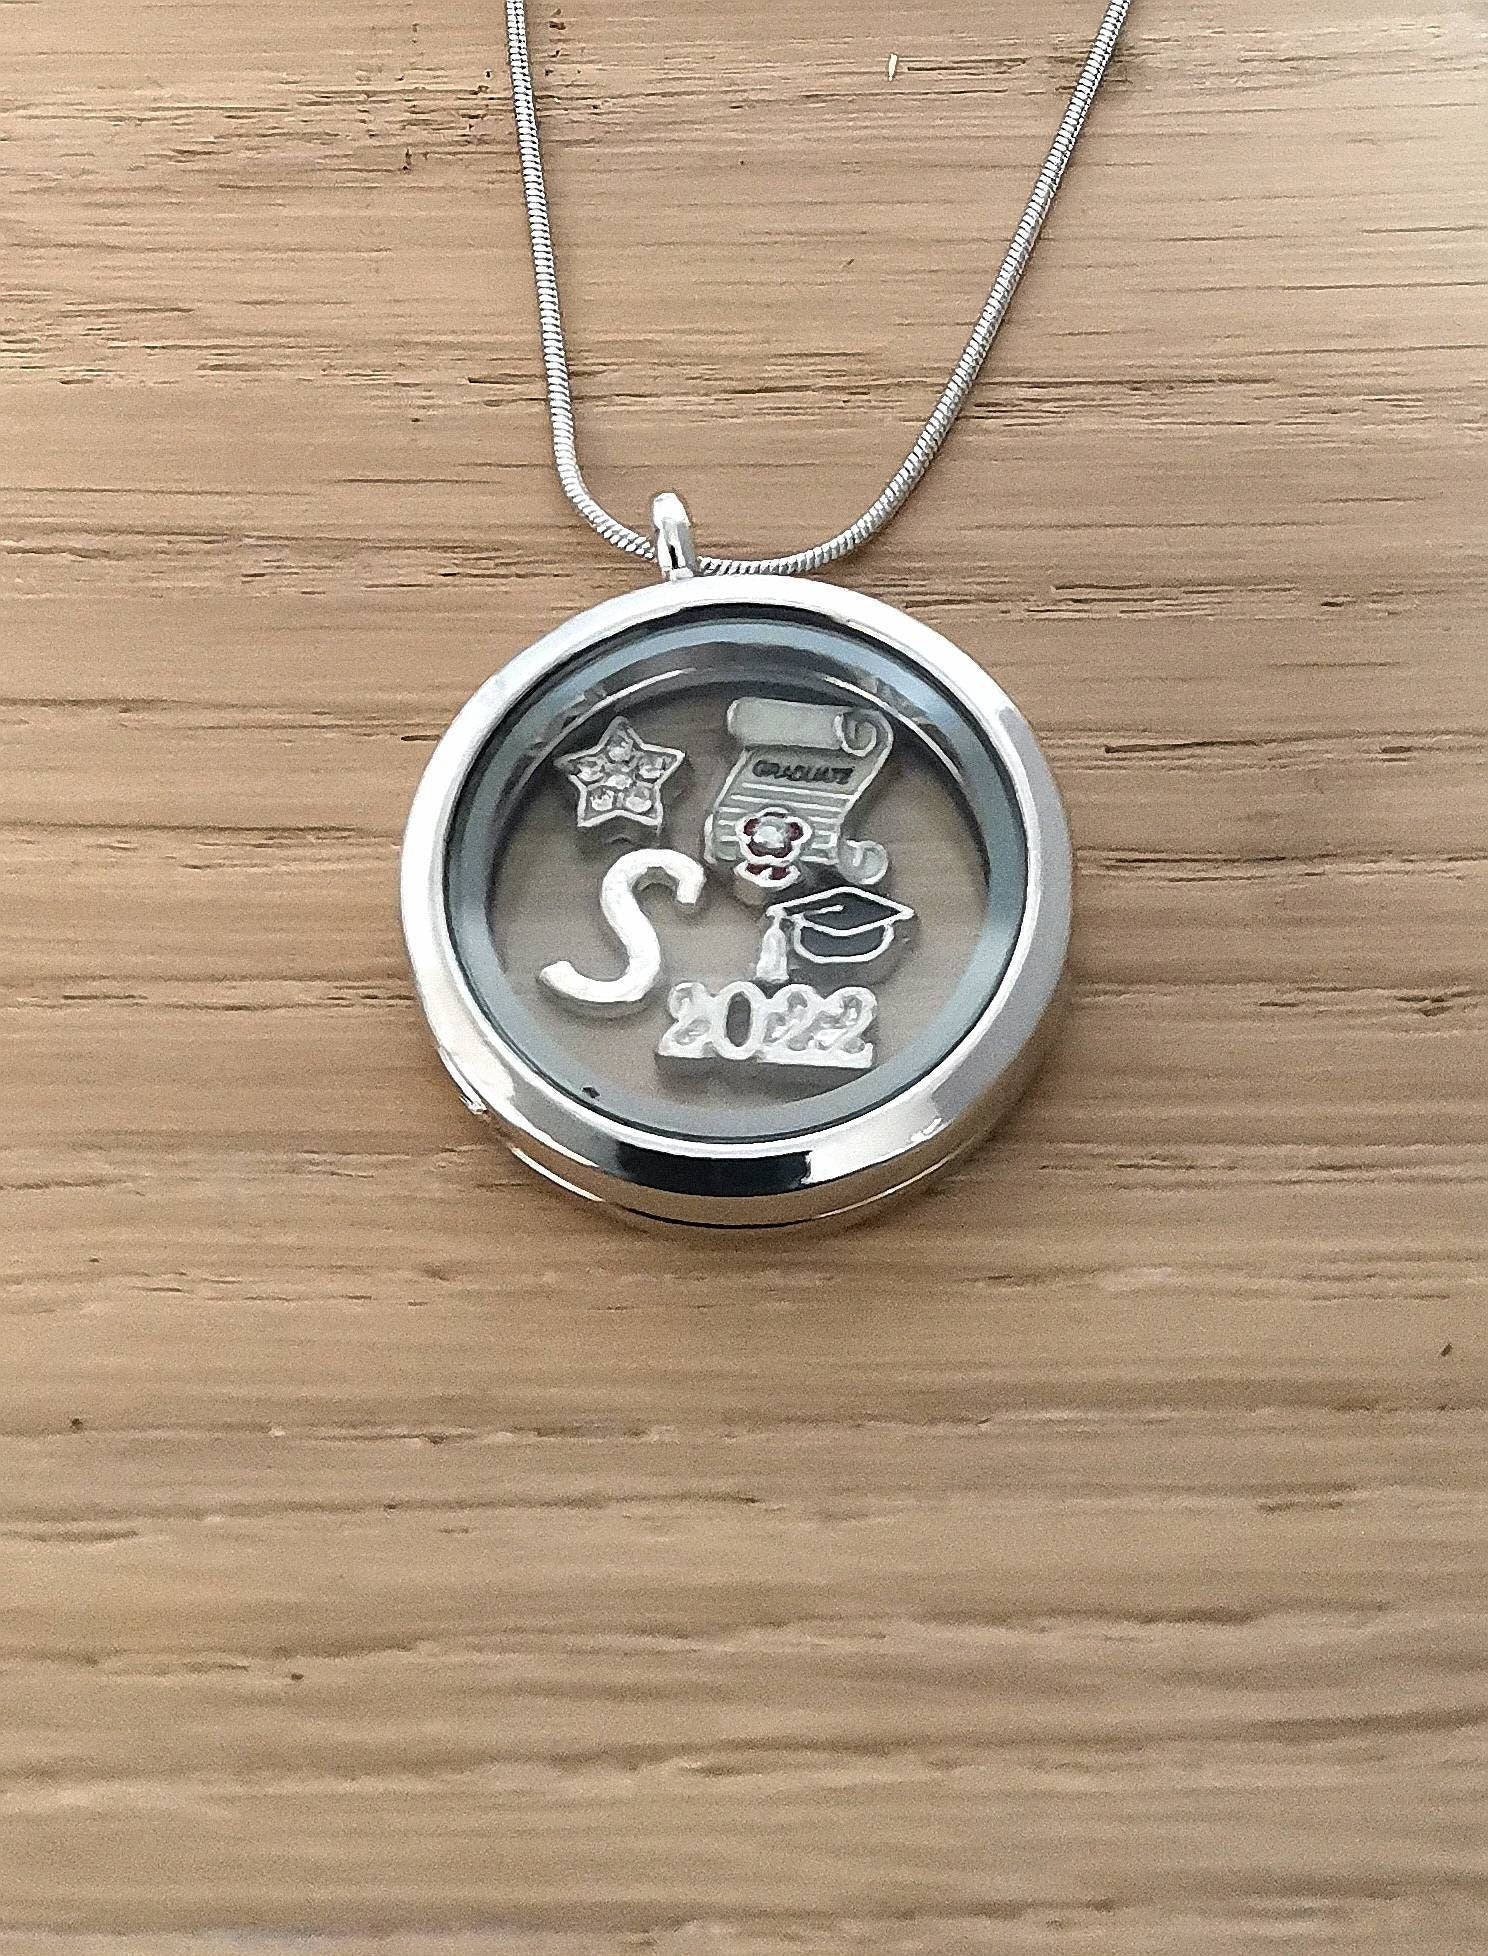 Class of 2022, Graduation Gifts for Her, Graduation Gifts for Daughter, 2022 Graduation Gifts, Graduation Present, Graduation Necklace, Grad